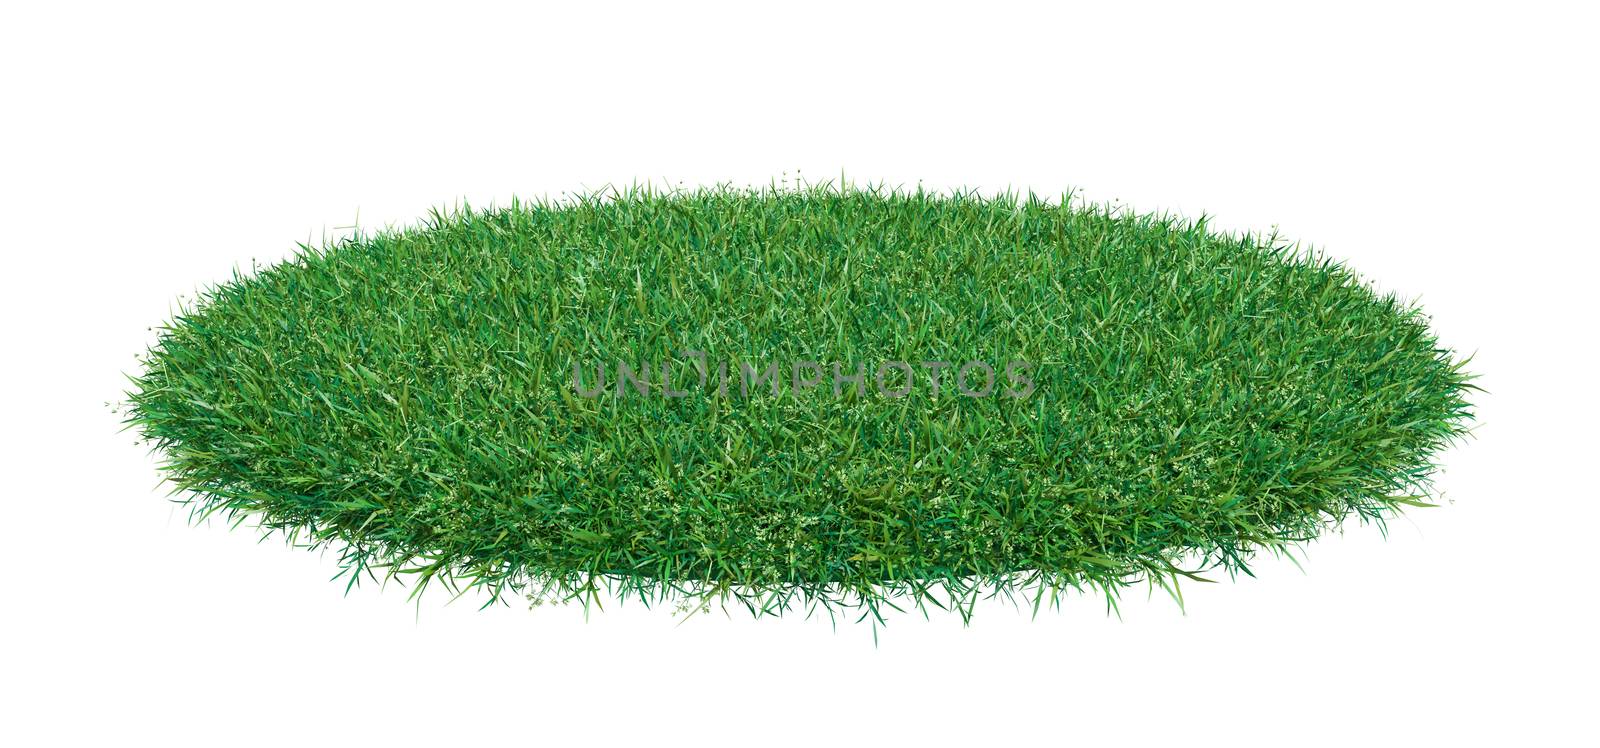 Fresh green grass on white background. 3D illustration. Empty space for your product or text